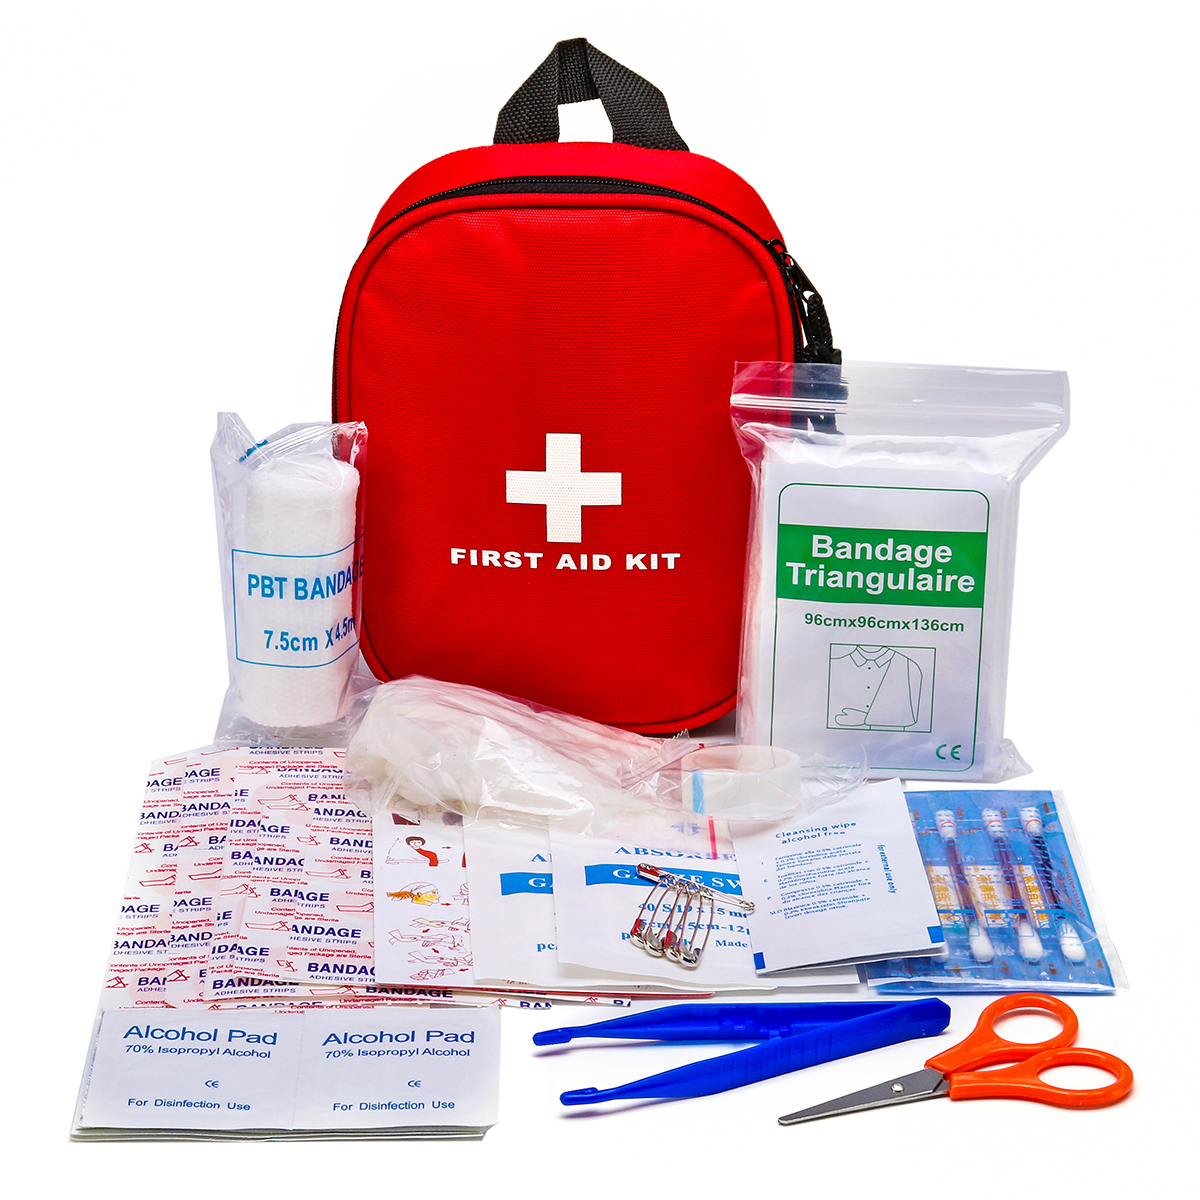 

46Pcs IN 1 SOS Emergency Survival Kit First Aid Kit For Home Office Camping